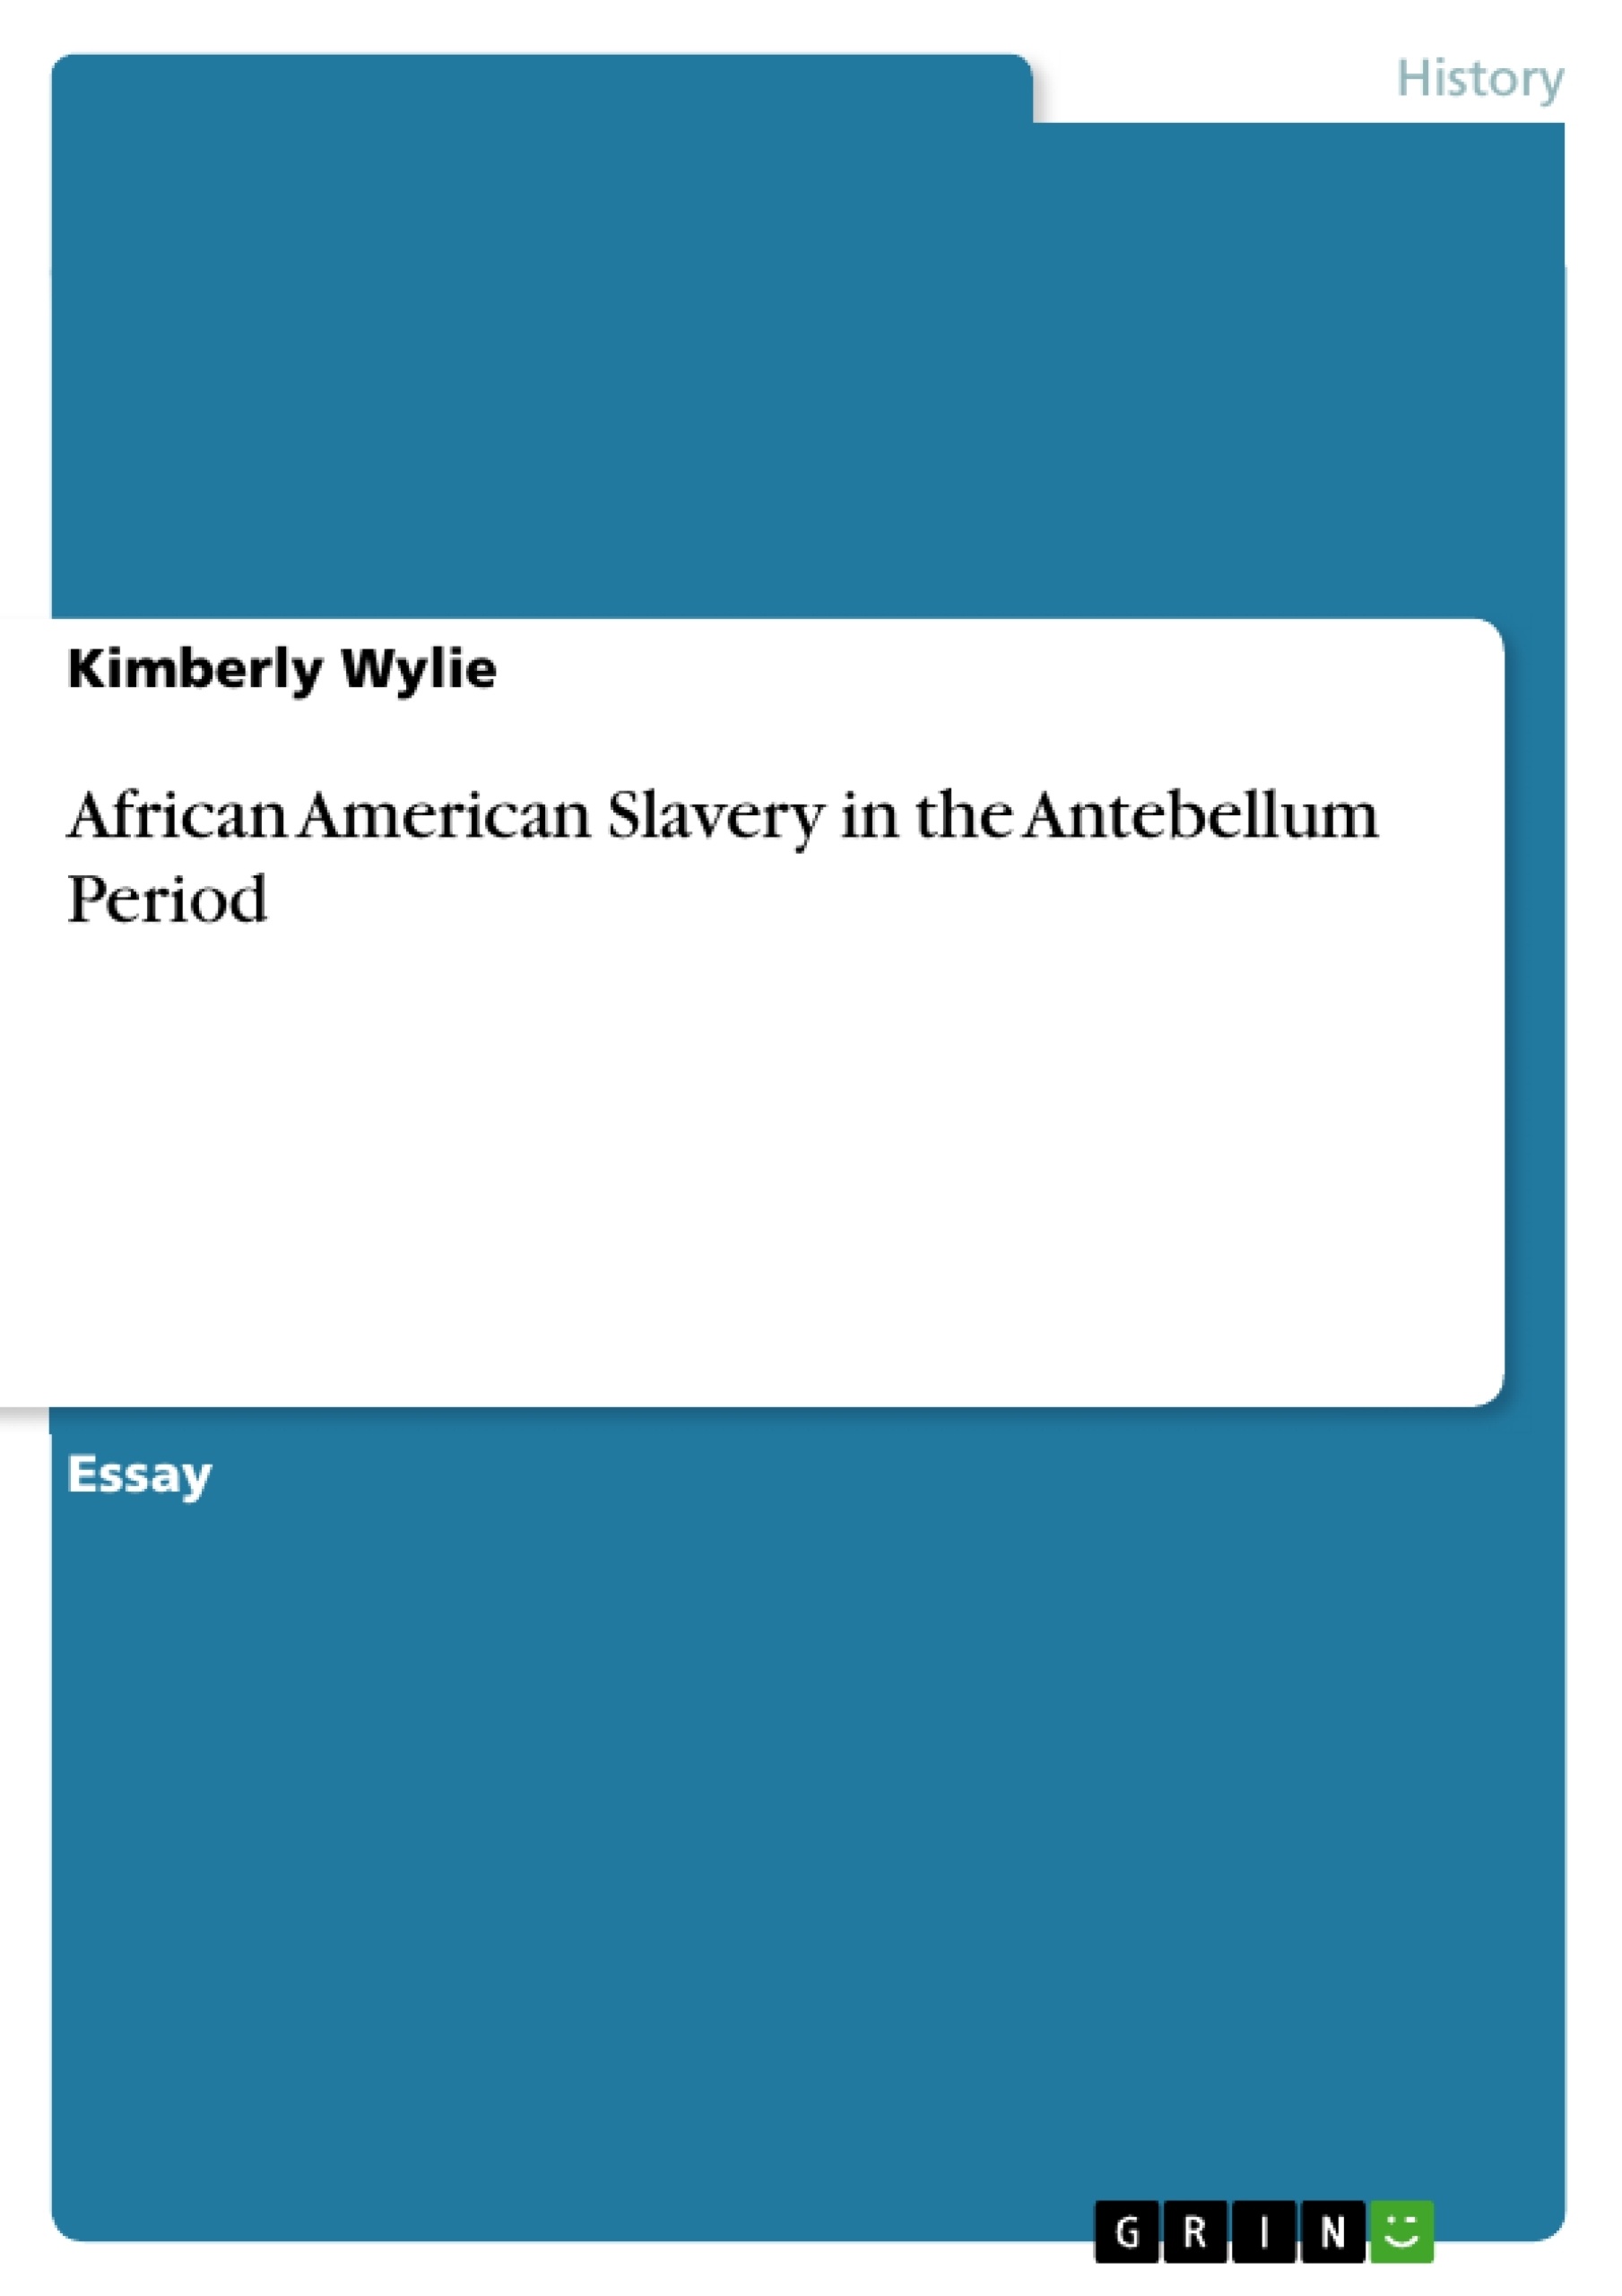 Title: African American Slavery in the Antebellum Period